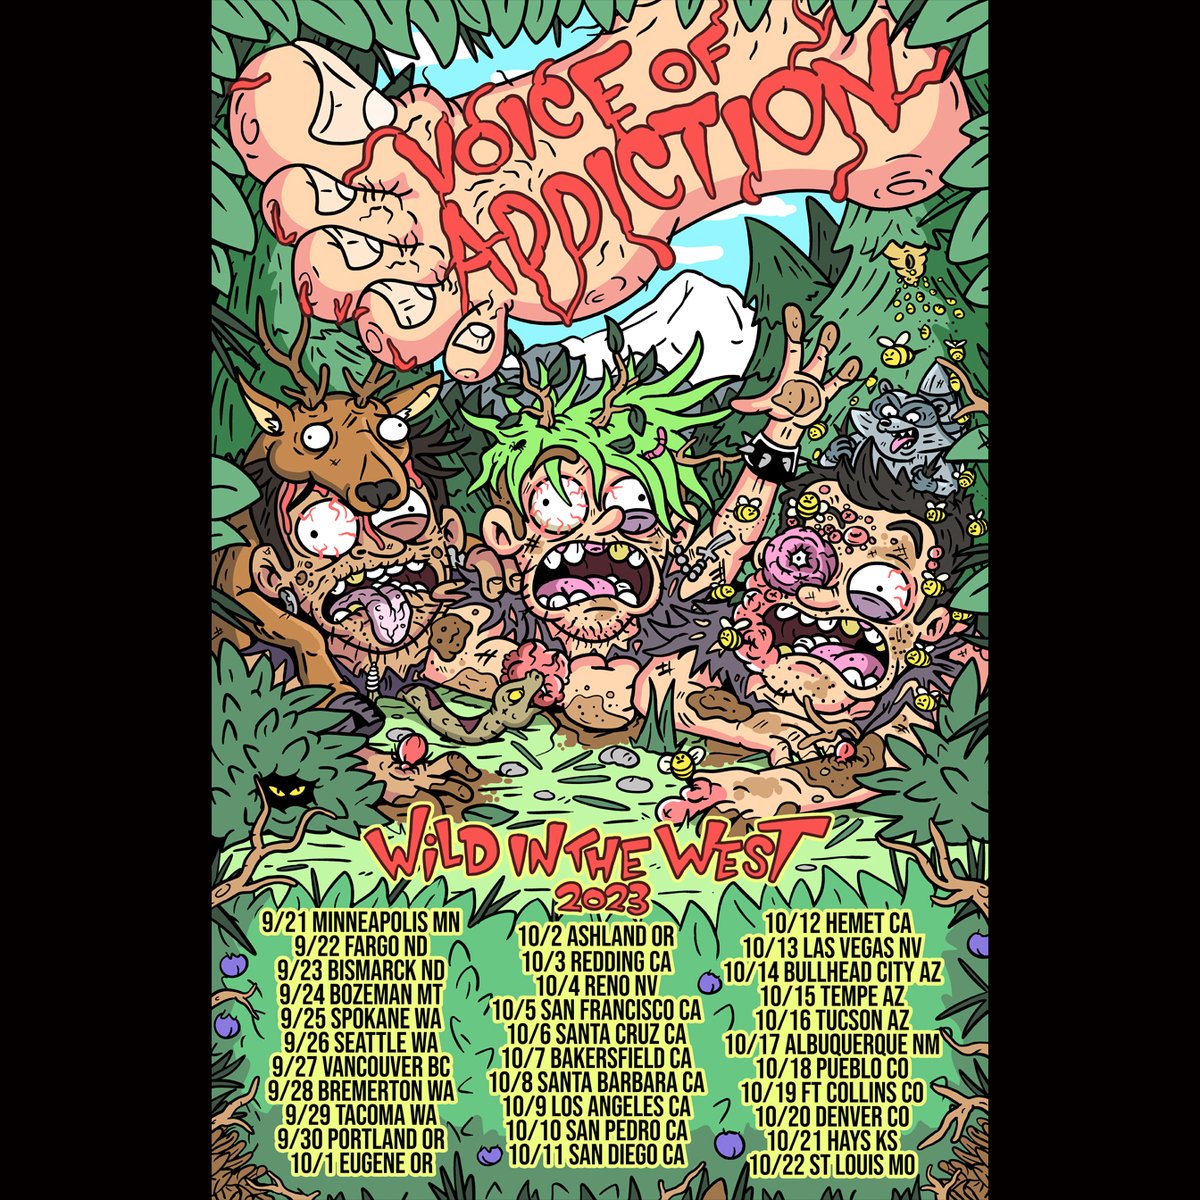 ONE WEEK! we leave for WILD IN THE WEST TOUR! details at VoiceOfAddiction.com